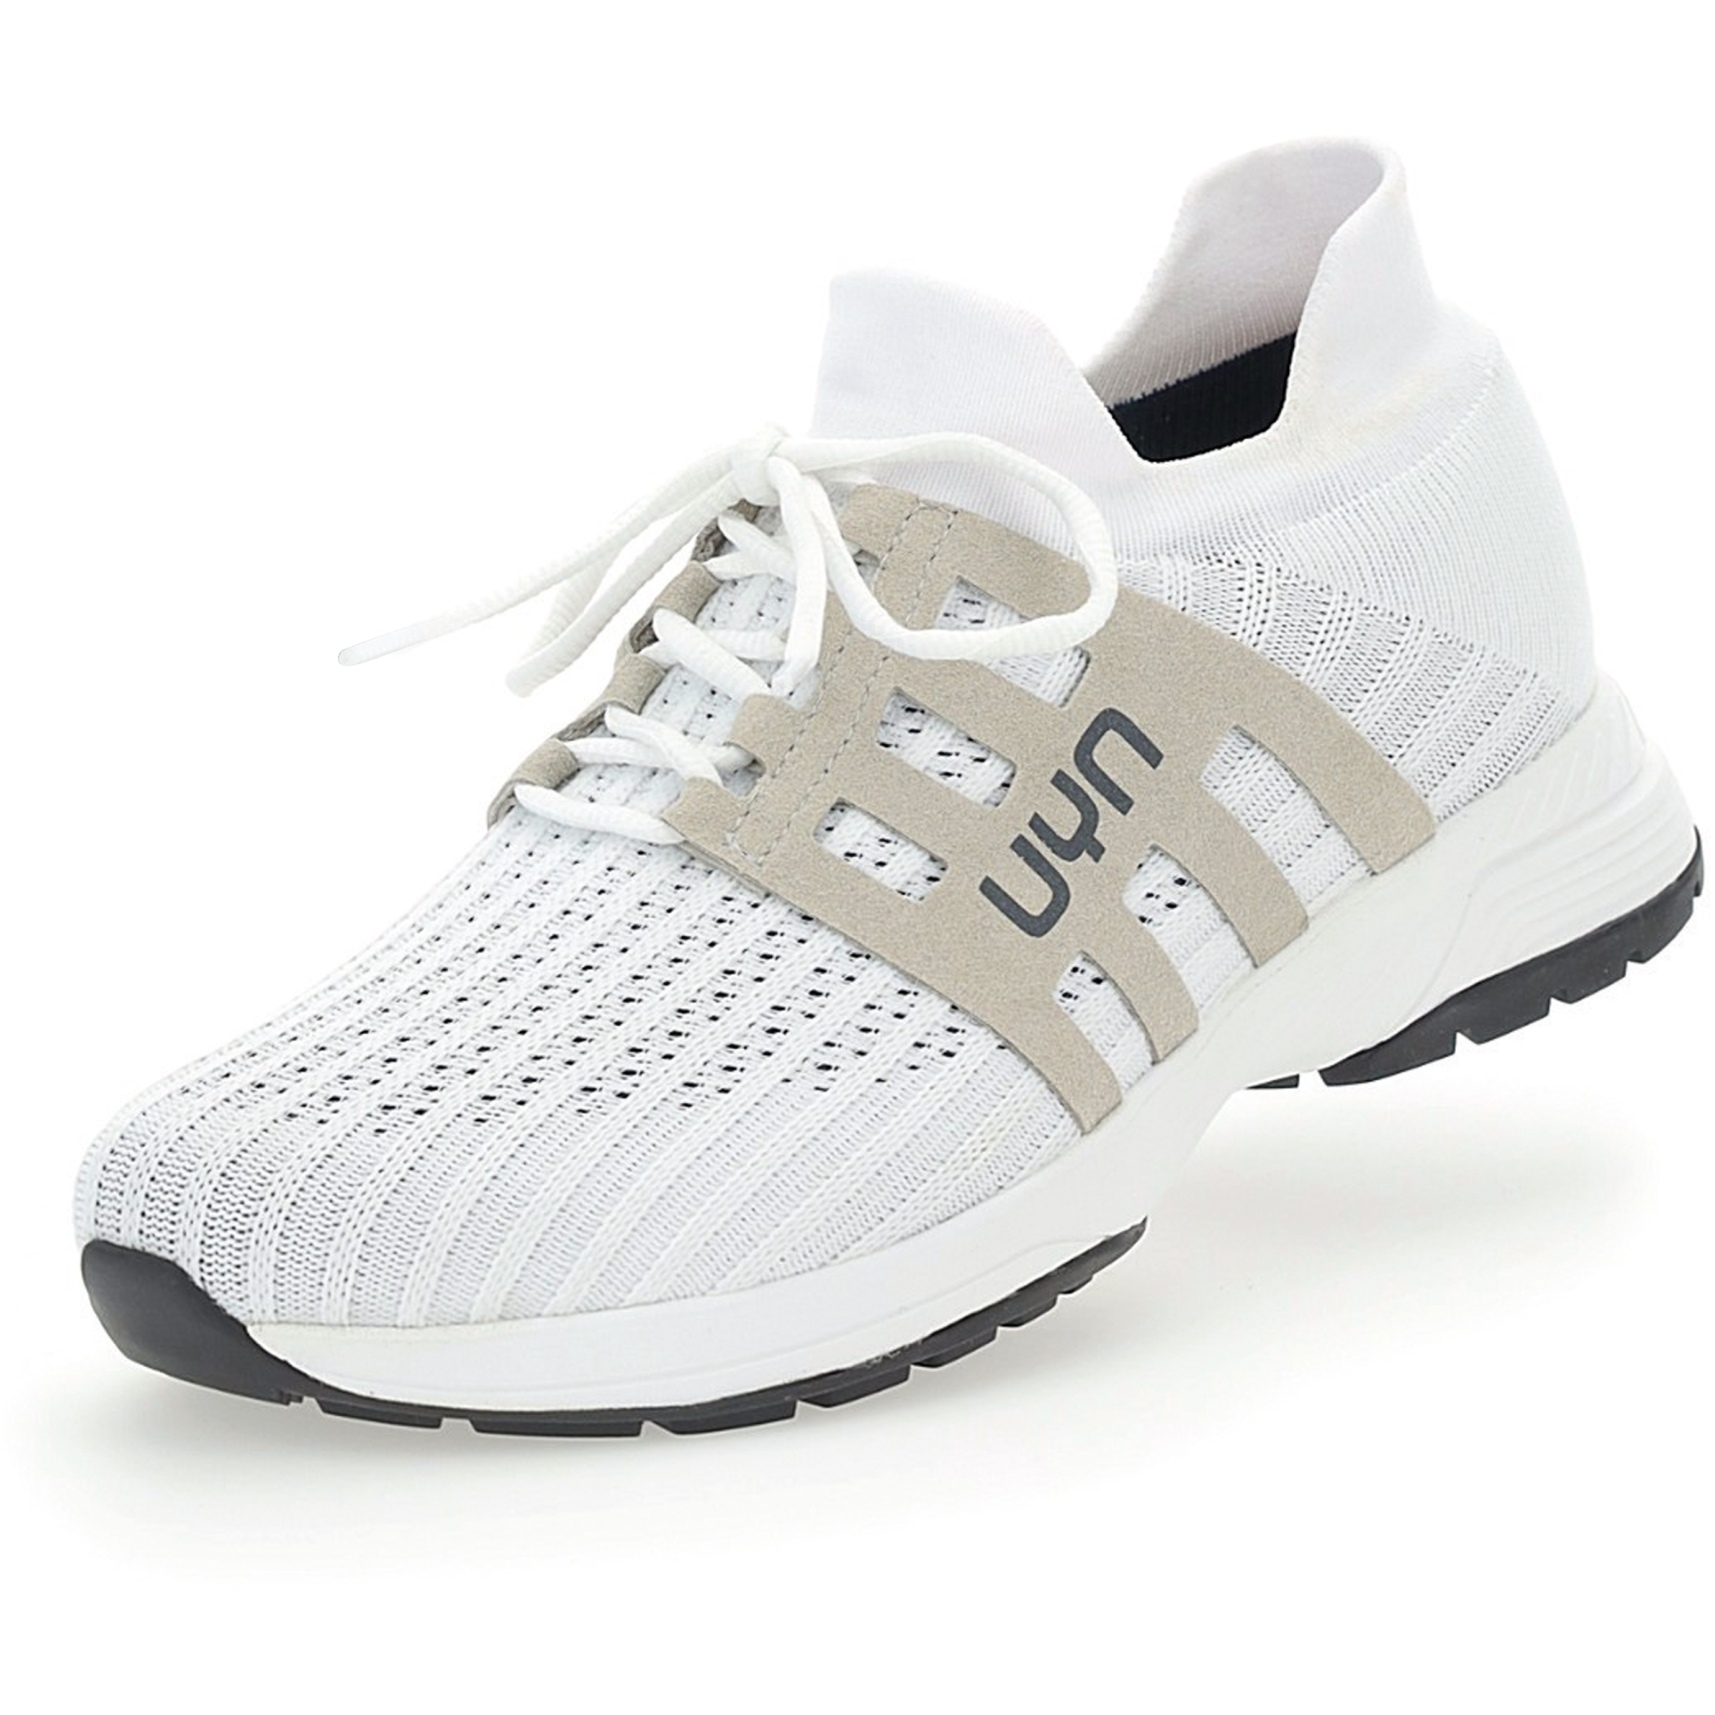 Picture of UYN Washi Running Shoes Women - White